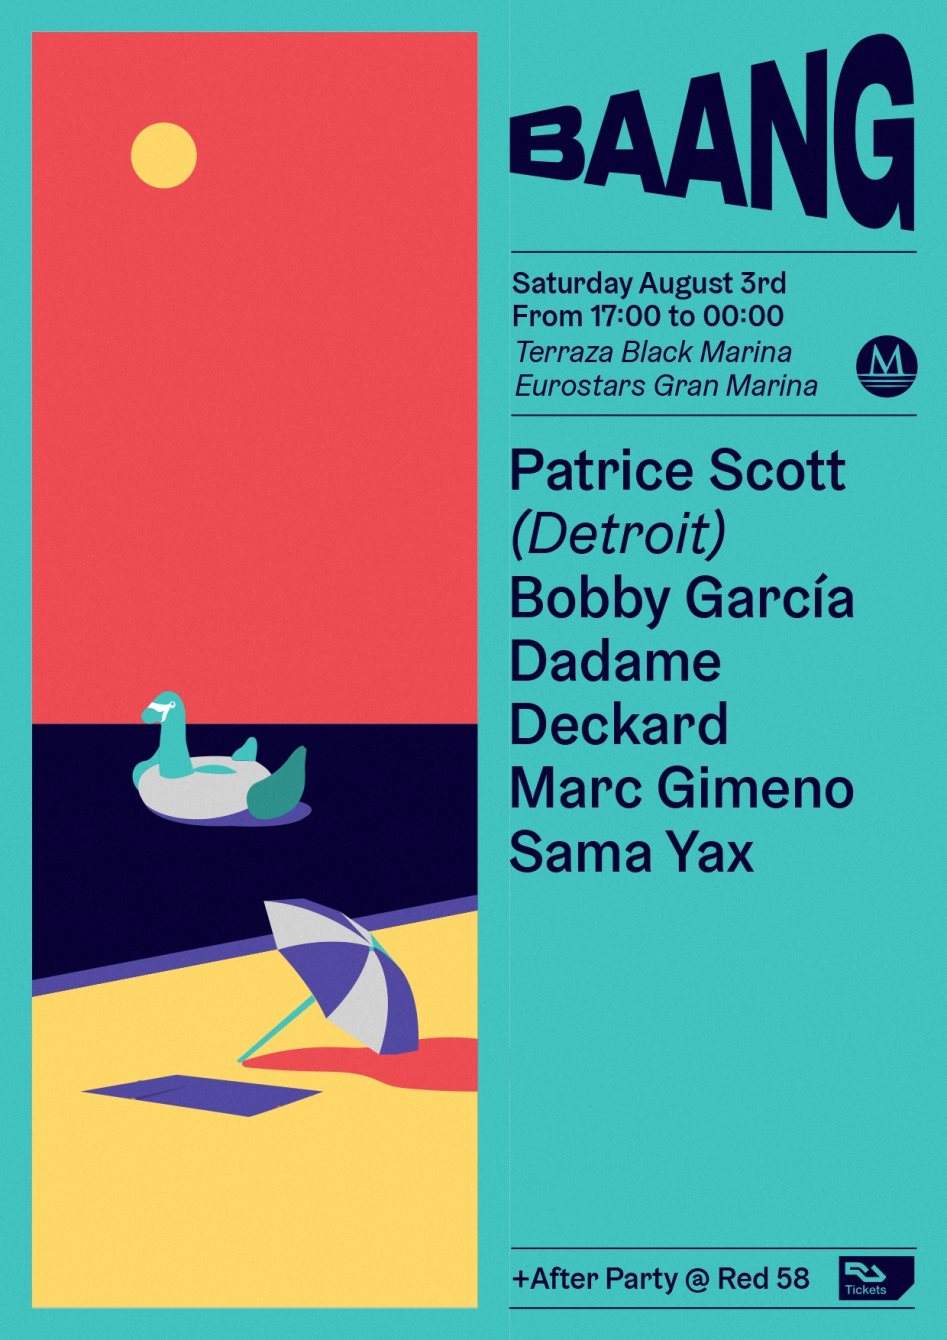 Baang 12h Rooftop Party + After Party at Red 58 with Patrice Scott & More - フライヤー裏